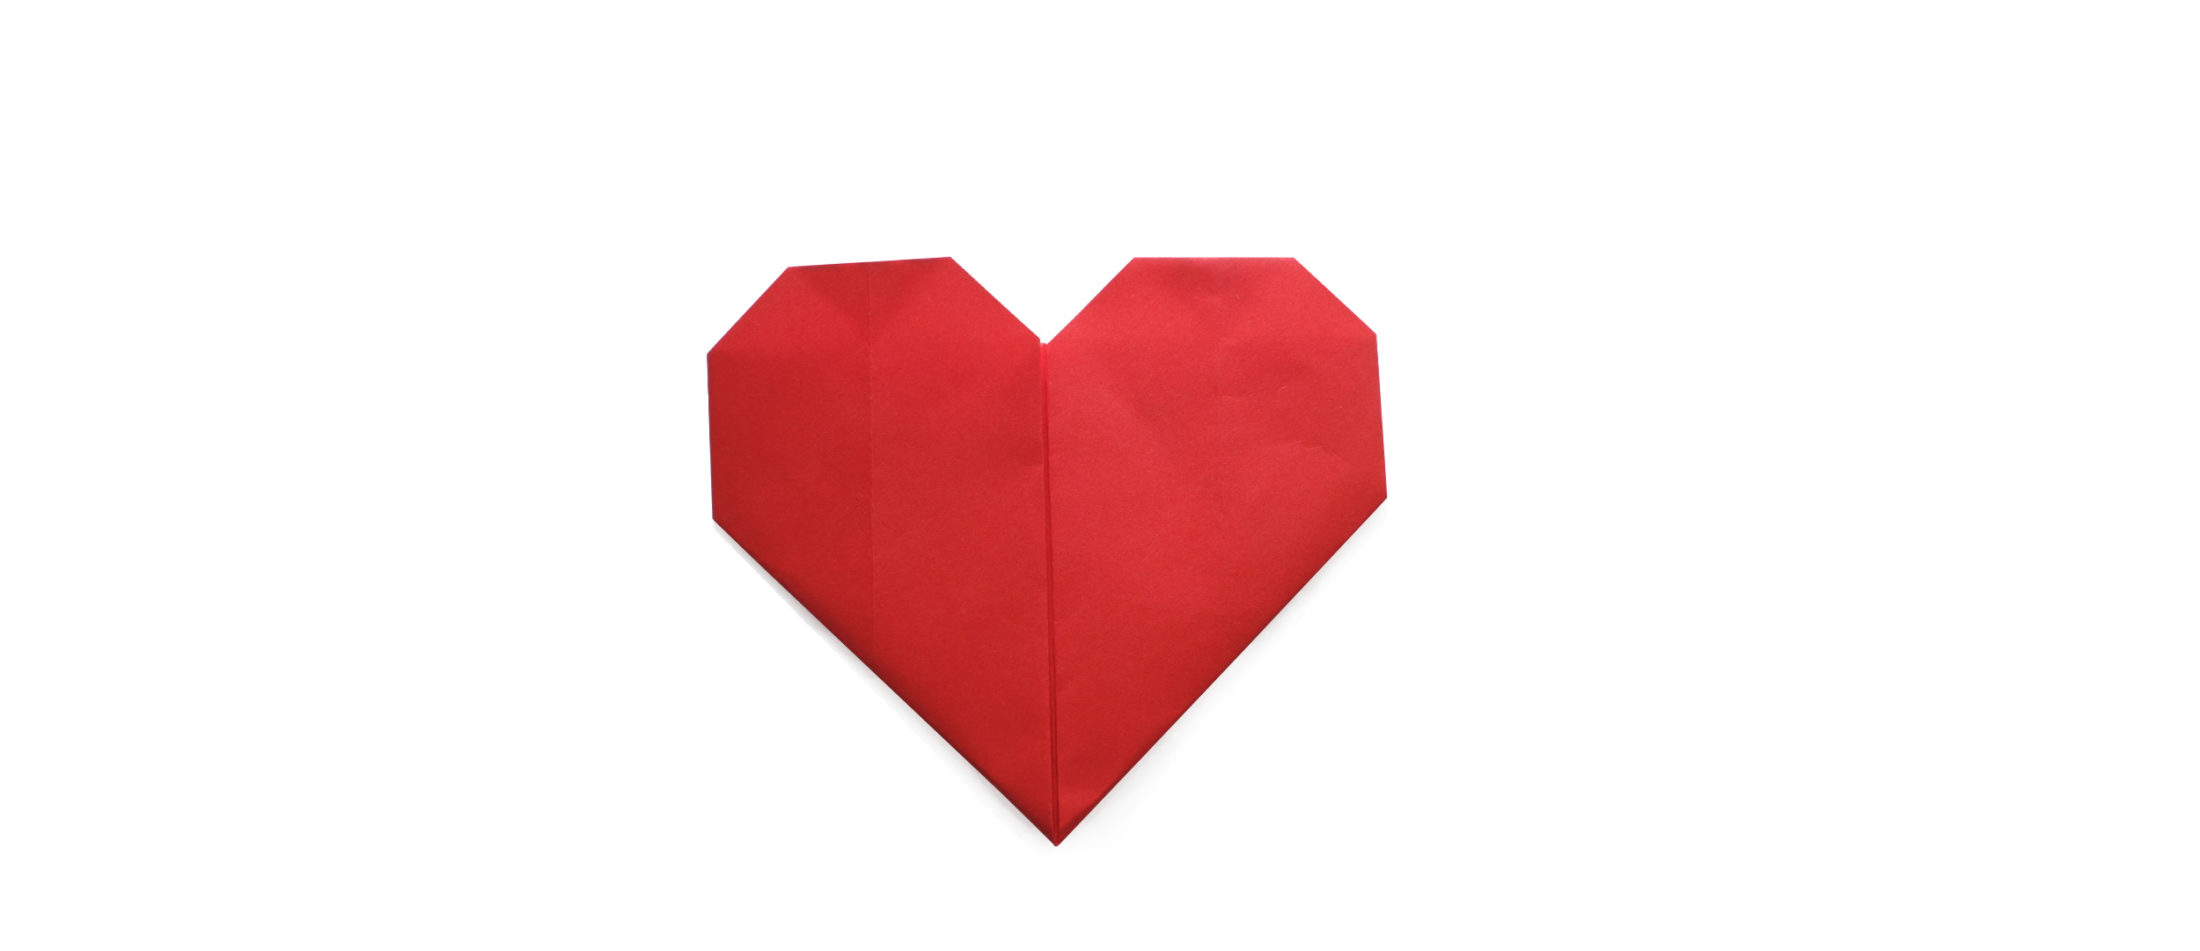 Old Love: Instaheart on Valentine’s